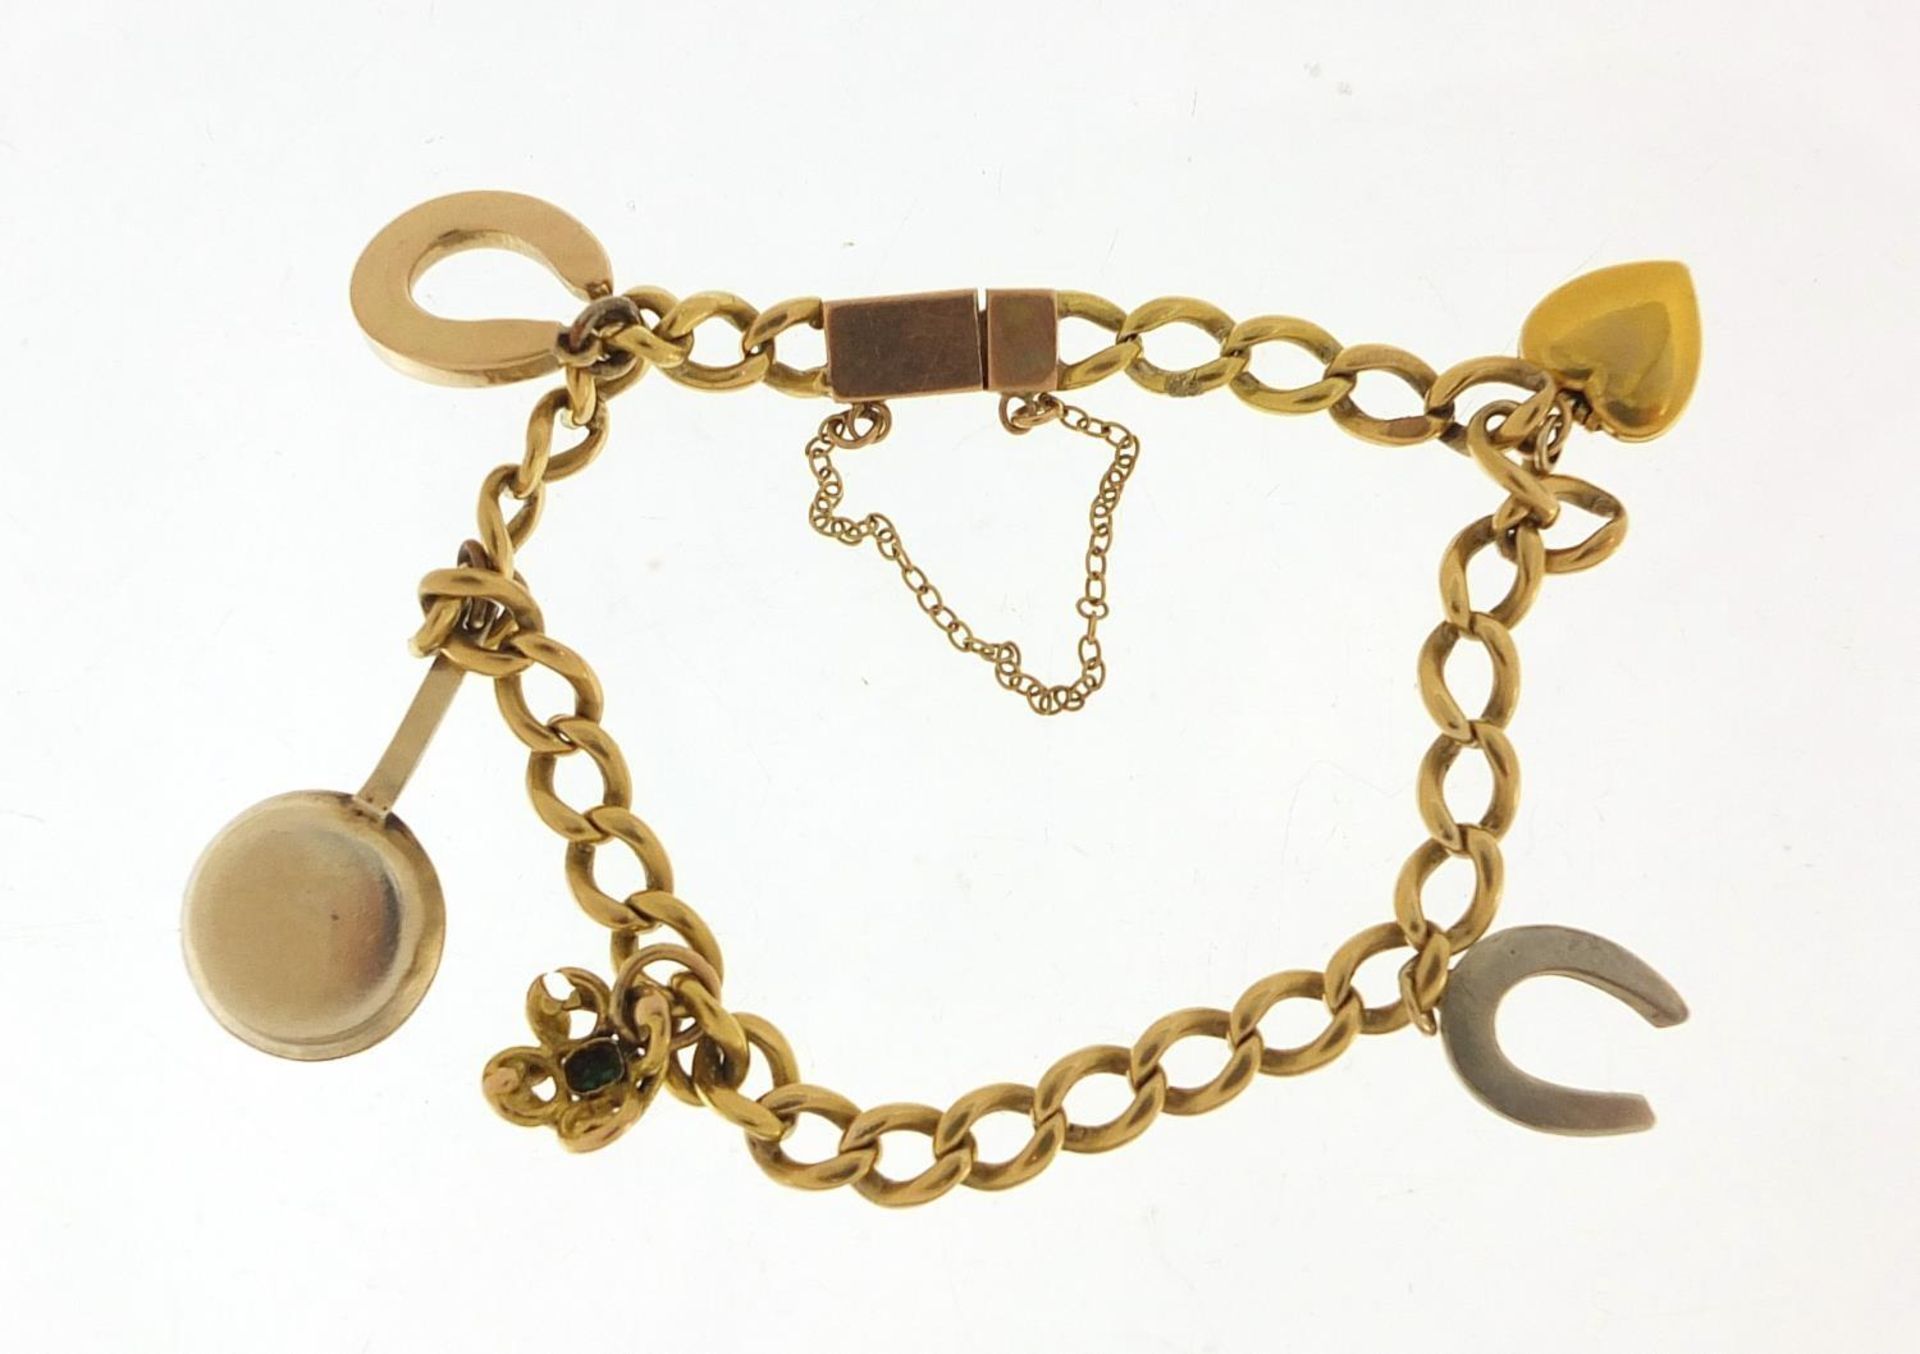 Unmarked gold bracelet with gold and silver charms, the bracelet tests as 18ct gold, total 23.0g : - Image 4 of 6